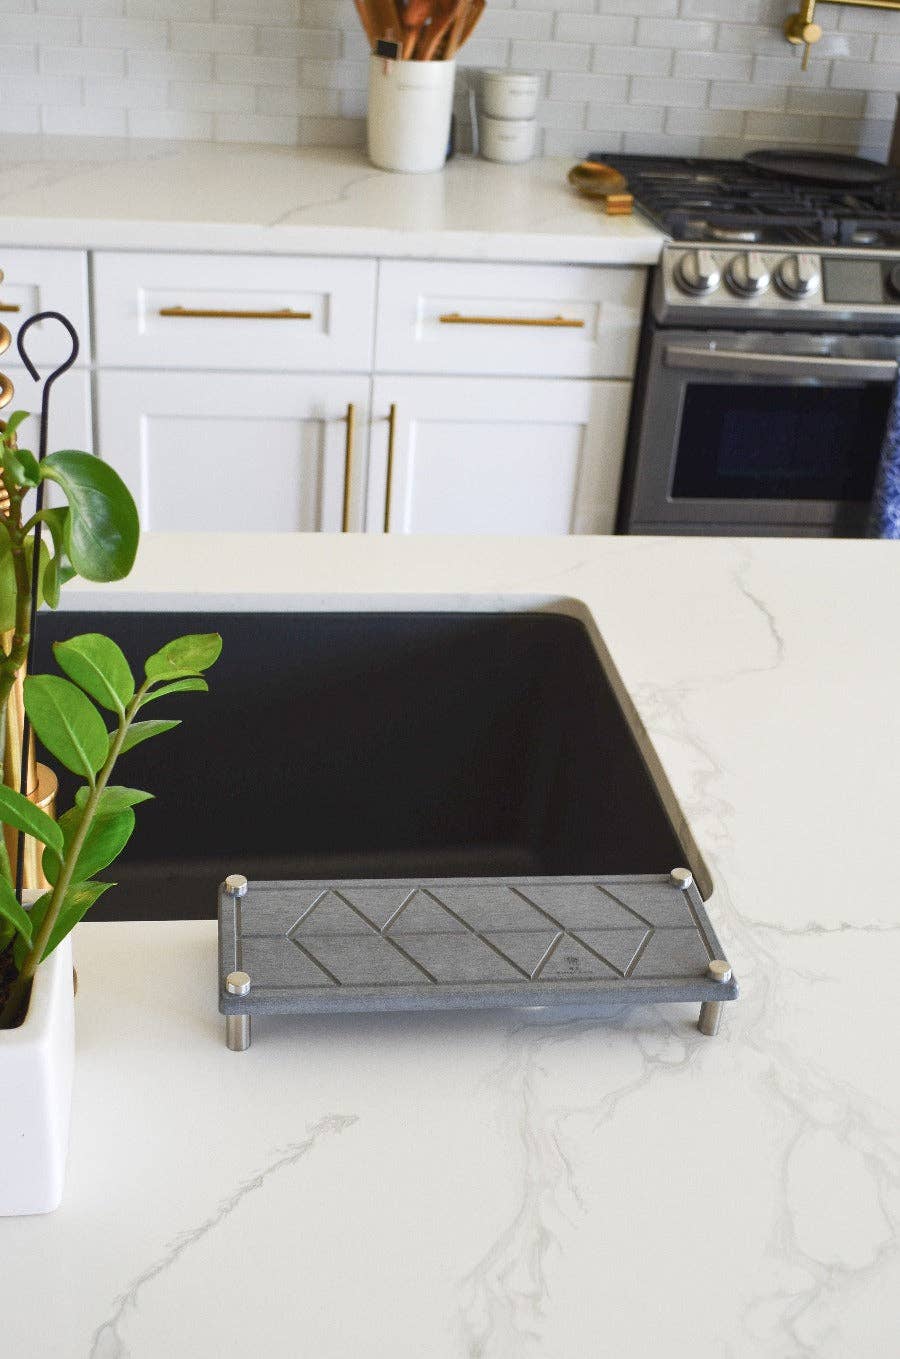 Me Mother Earth - Quick-Dry Diatomite Sink Caddy